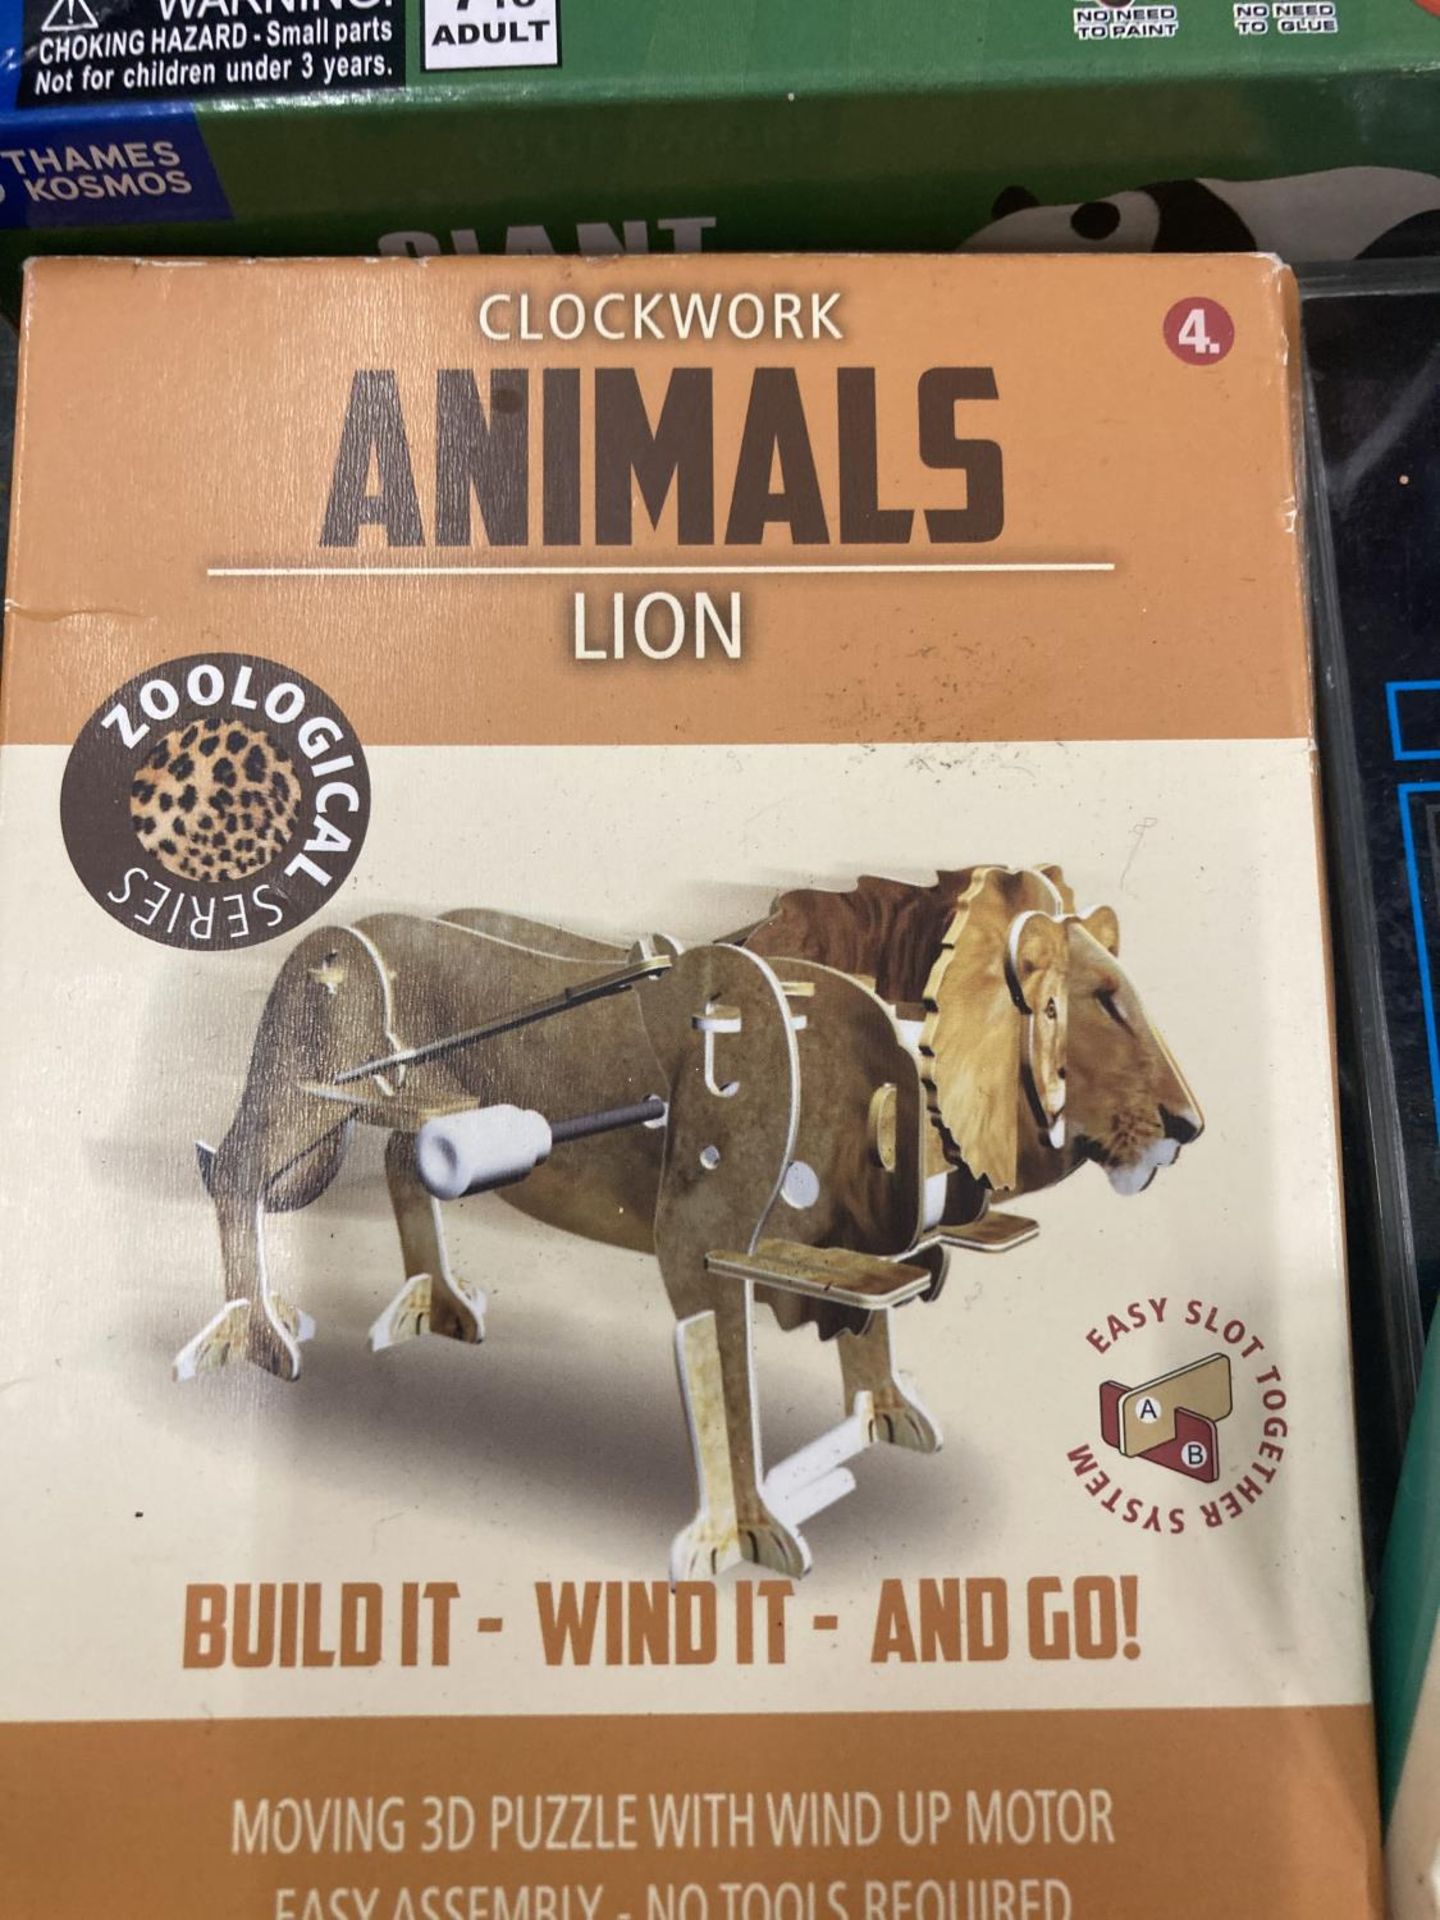 A COLLECTION OF VINTAGE AND MODERN GAMES TO INCLUDE DOMINOES, CLOCKWORK ANIMALS, TRIVIA, ETC - Image 2 of 4